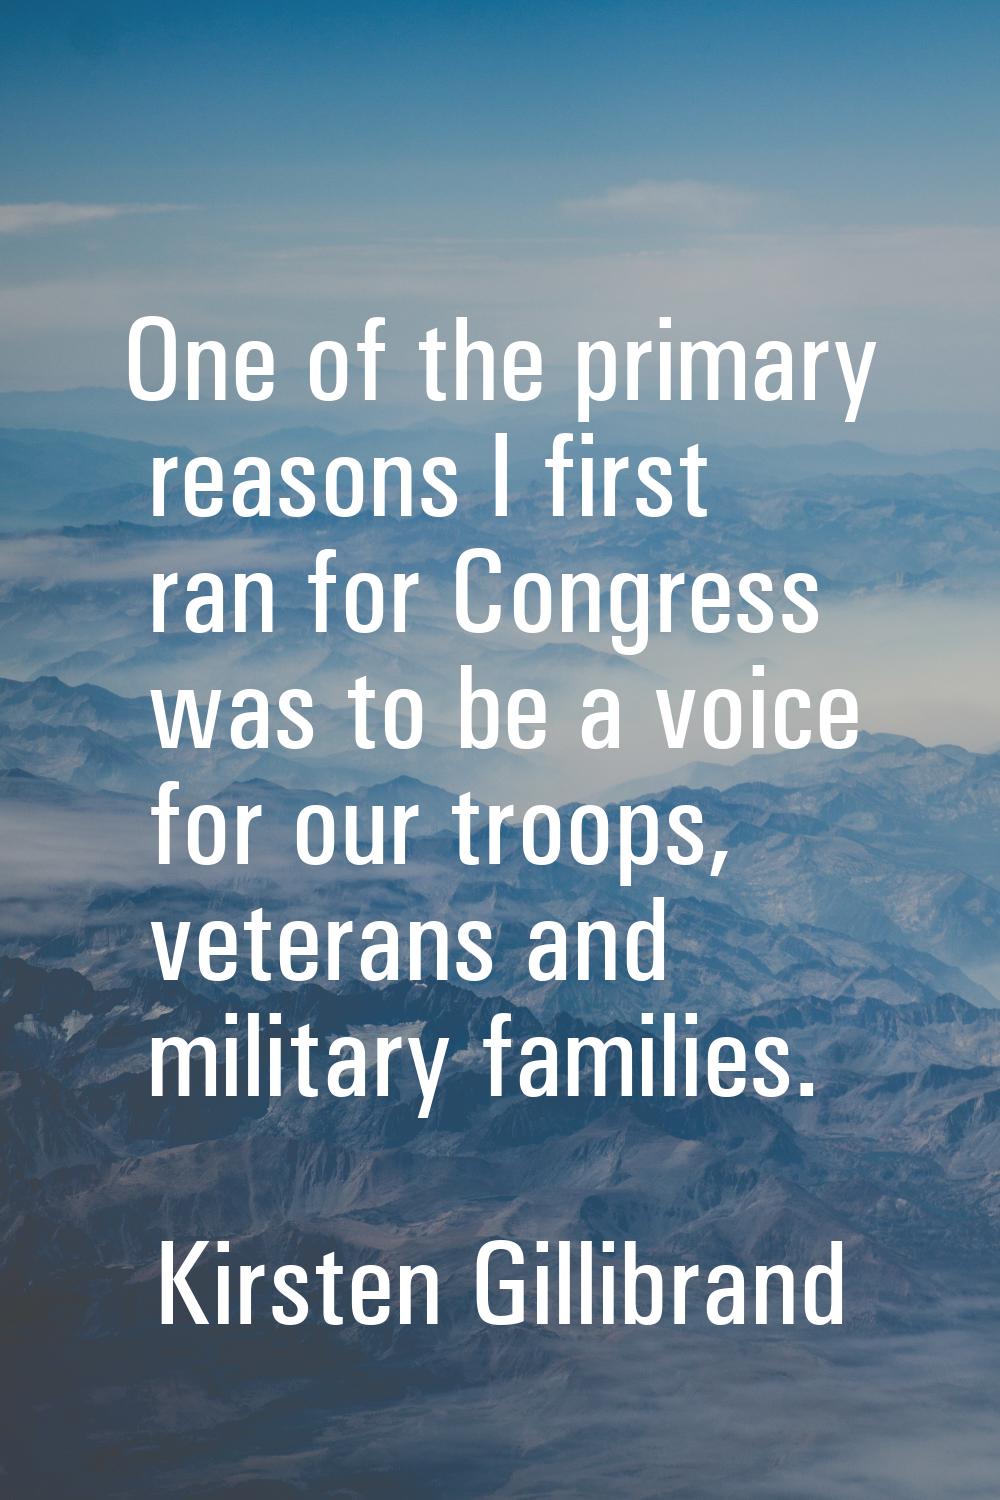 One of the primary reasons I first ran for Congress was to be a voice for our troops, veterans and 